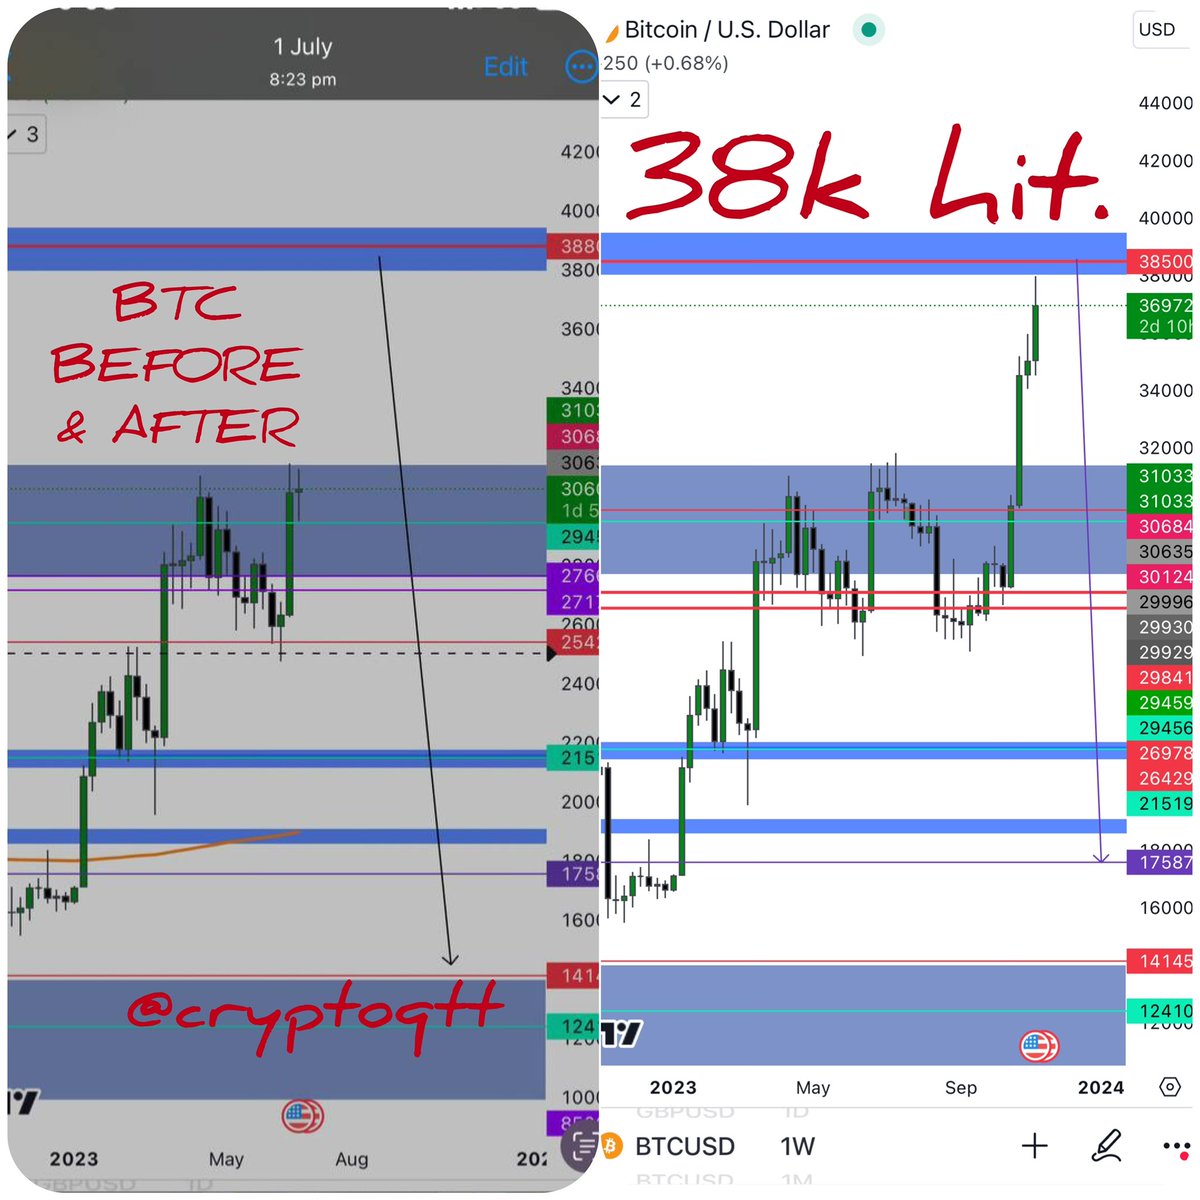 BTC before and after July - November 38k target of mine finally Hit. Now wait for the melt ✴️✴️✴️